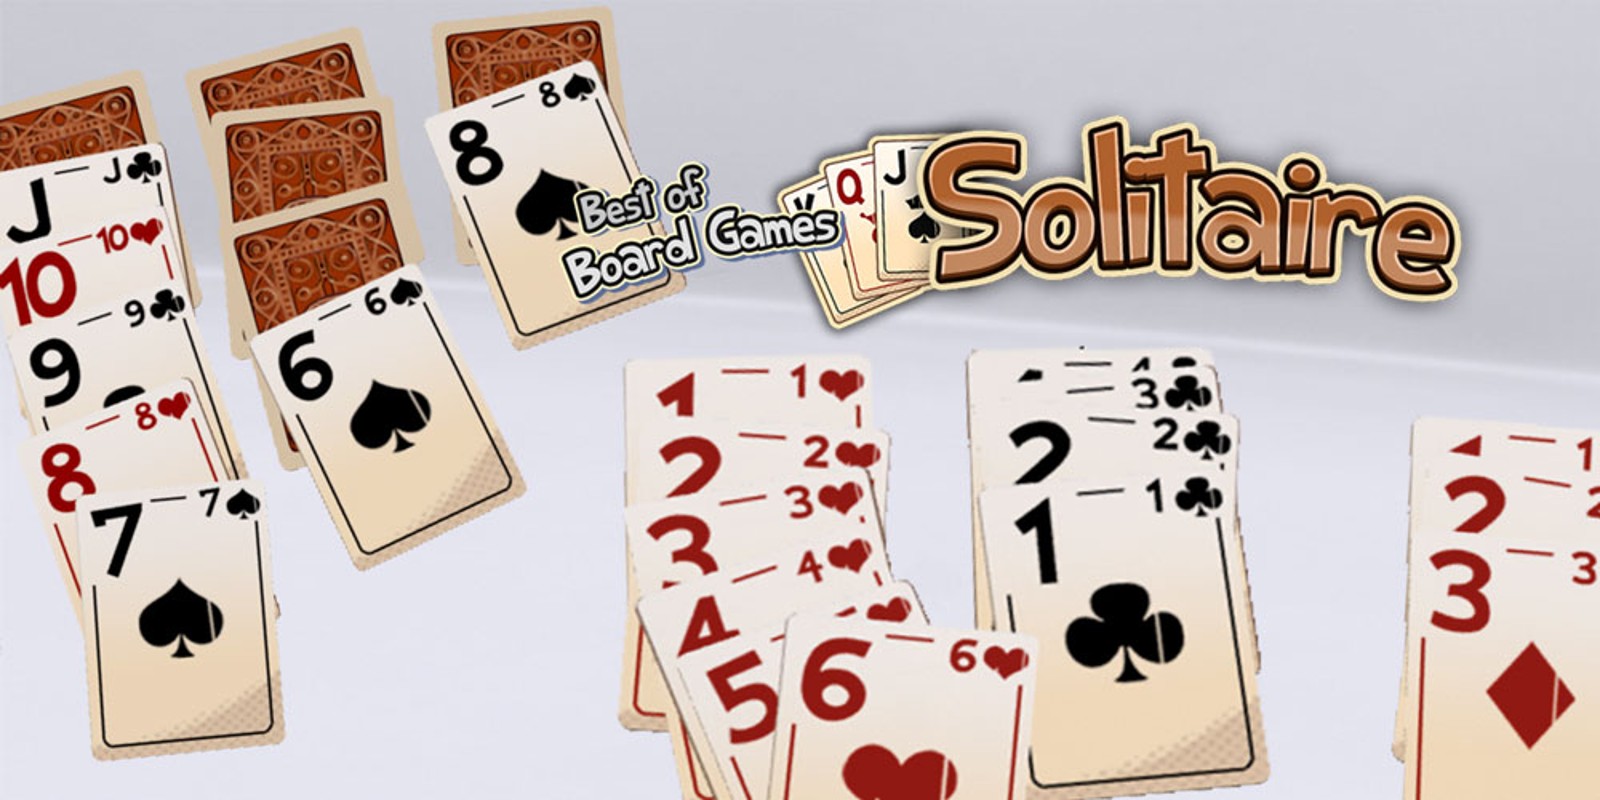 Best of Board Games – Solitaire